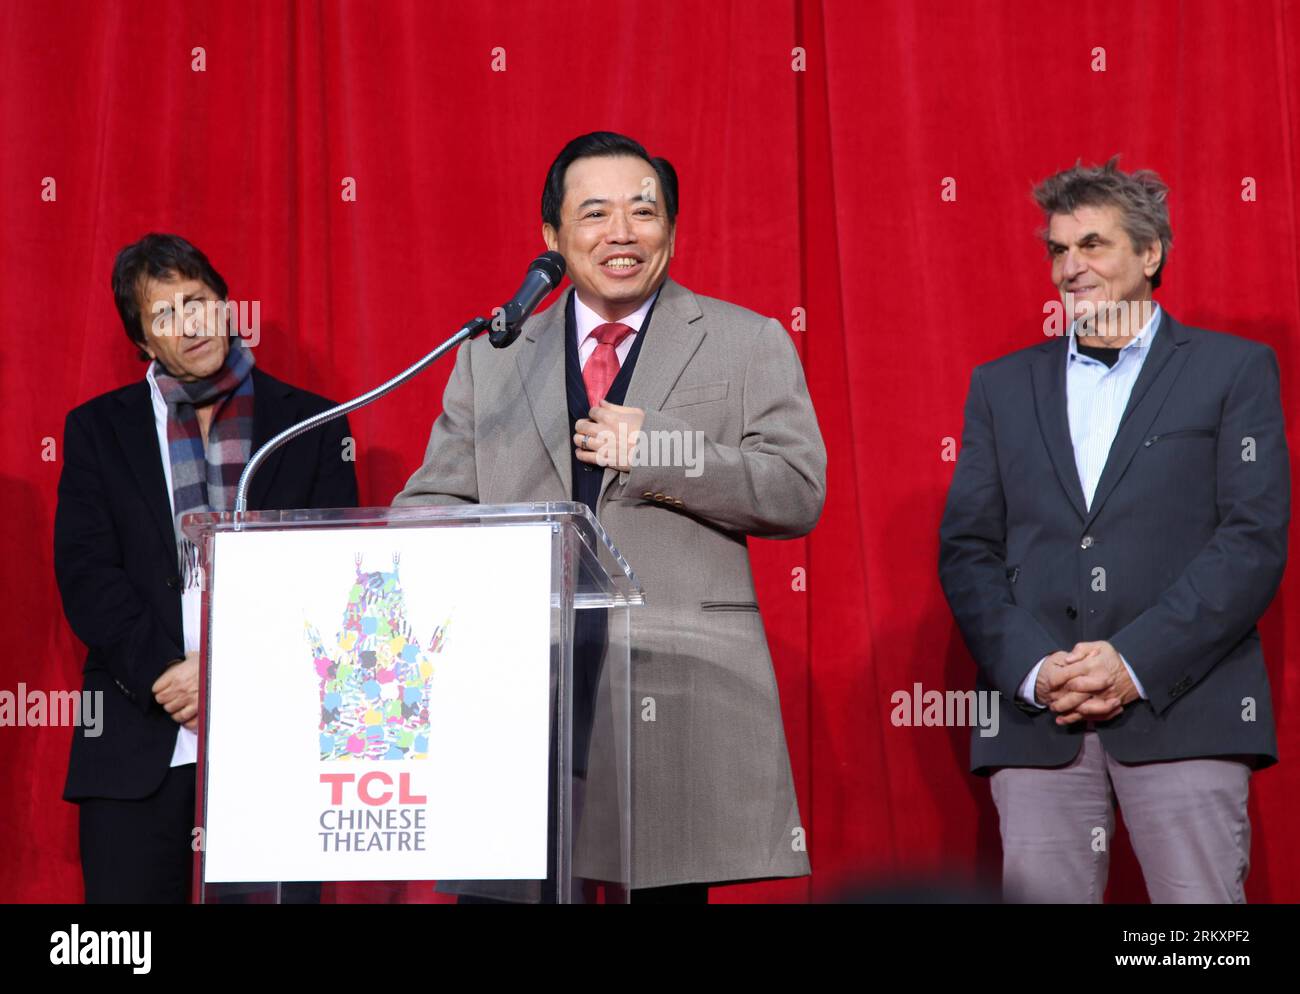 Bildnummer: 59046541  Datum: 11.01.2013  Copyright: imago/Xinhua LOS ANGELES, Jan. 11, 2013 - Li Dongsheng (C), chairman of the Board and Chief Executive Officer of TCL Corporation, speaks during a ceremony at Grauman s Chinese Theatre in Hollywood, Los Angeles, the United States, on Jan. 11, 2013. The renowned Grauman s Chinese Theatre in Hollywood, Los Angeles, was renamed the TCL Chinese Theatre on Friday, after TCL Corporation, a major Chinese electronics company, bought the naming rights for 10 years. (Xinhua/Xue Ying) US-LOS ANGELES-TCL-CHINESE THEATRE PUBLICATIONxNOTxINxCHN Wirtschaft P Stock Photo